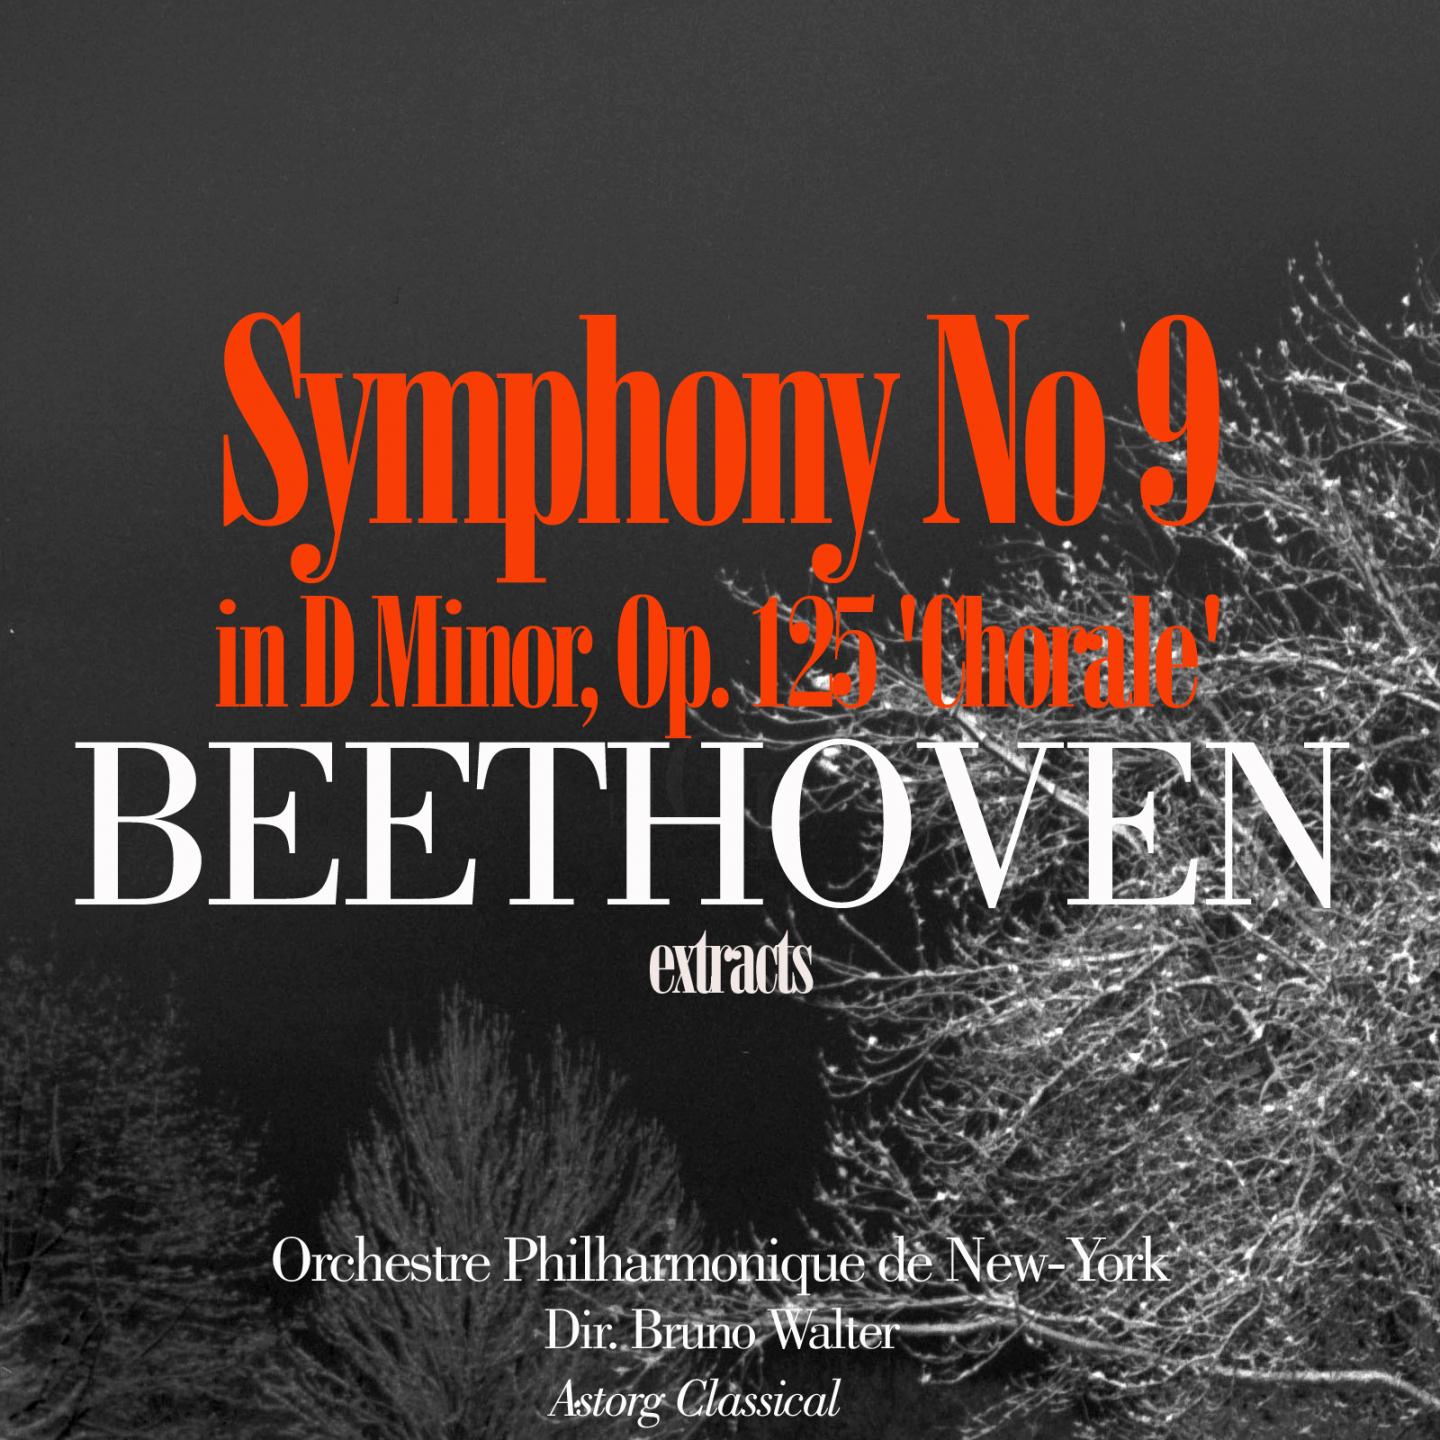 Постер альбома Beethoven: Symphony No. 9 in D Minor, Op. 125 'Chorale' (Extracts)